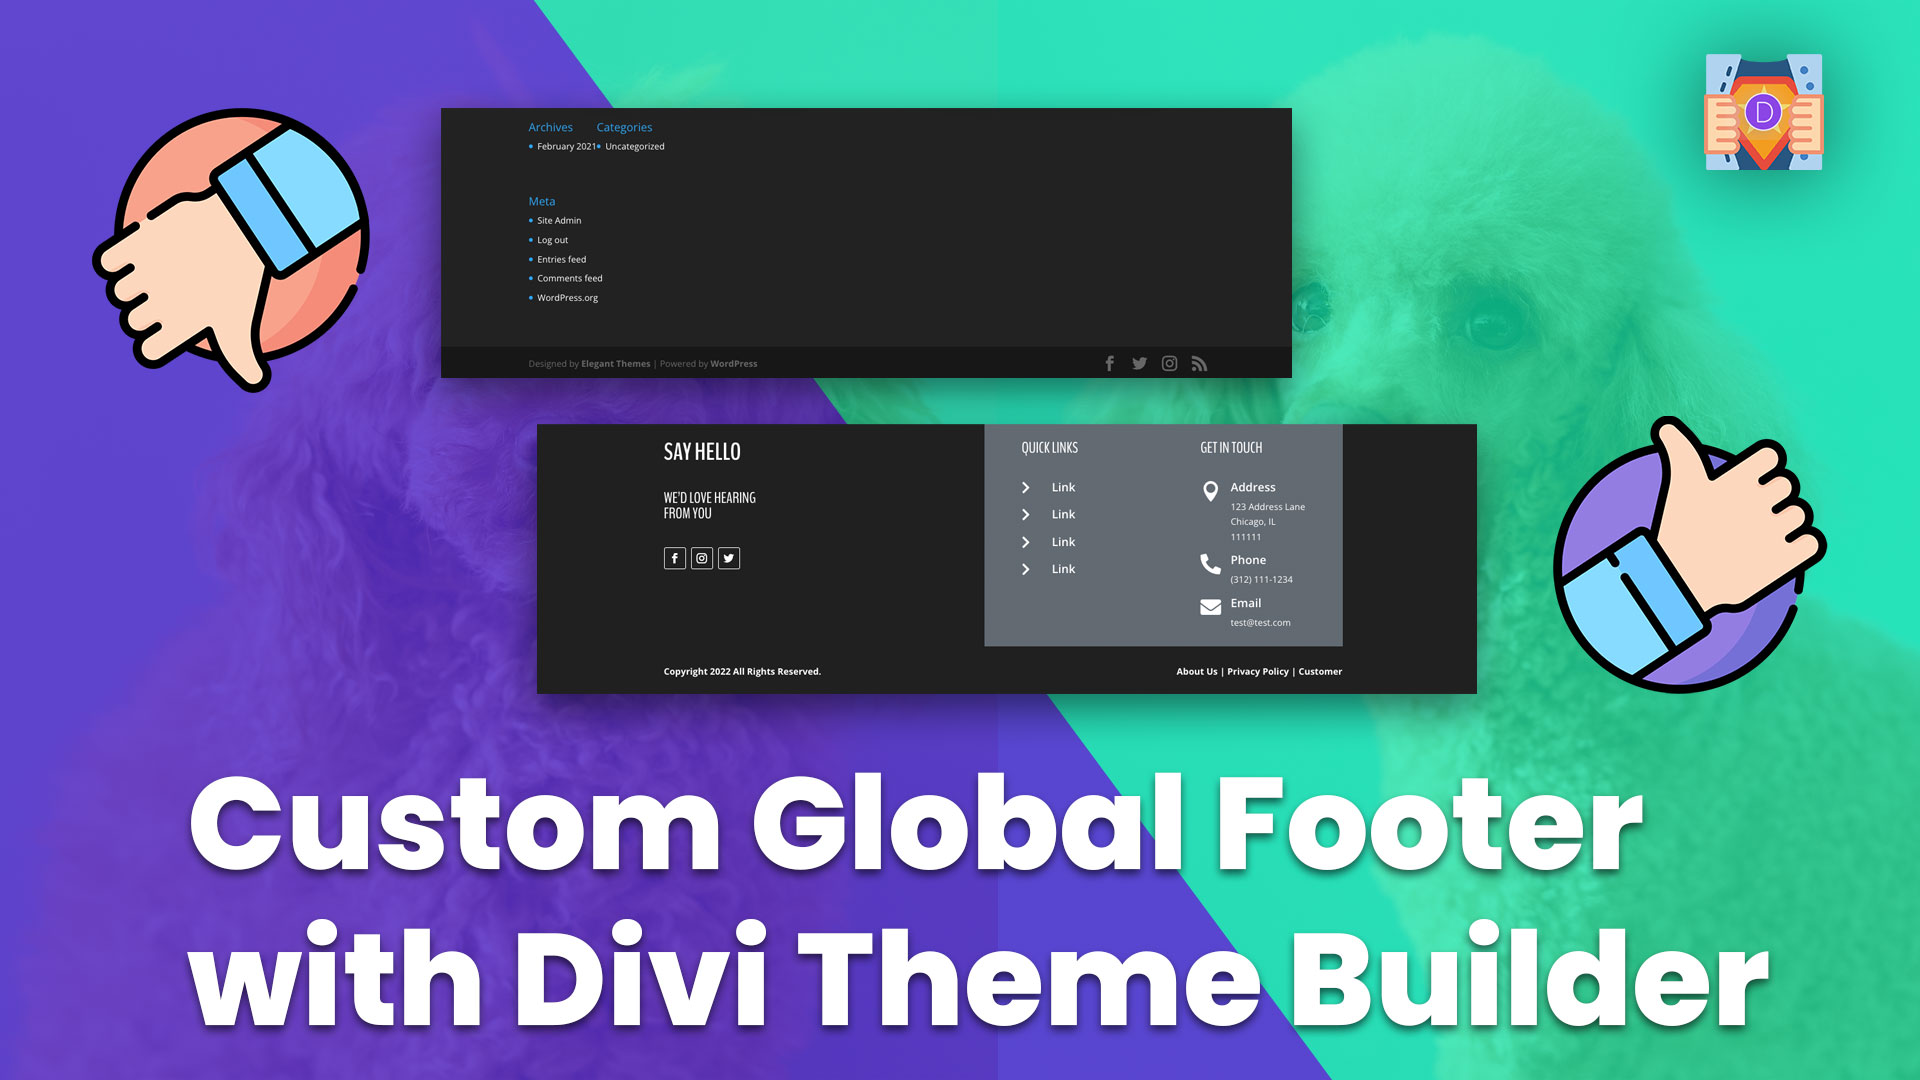 How to Build a Custom Global Footer in Divi using the Theme Builder